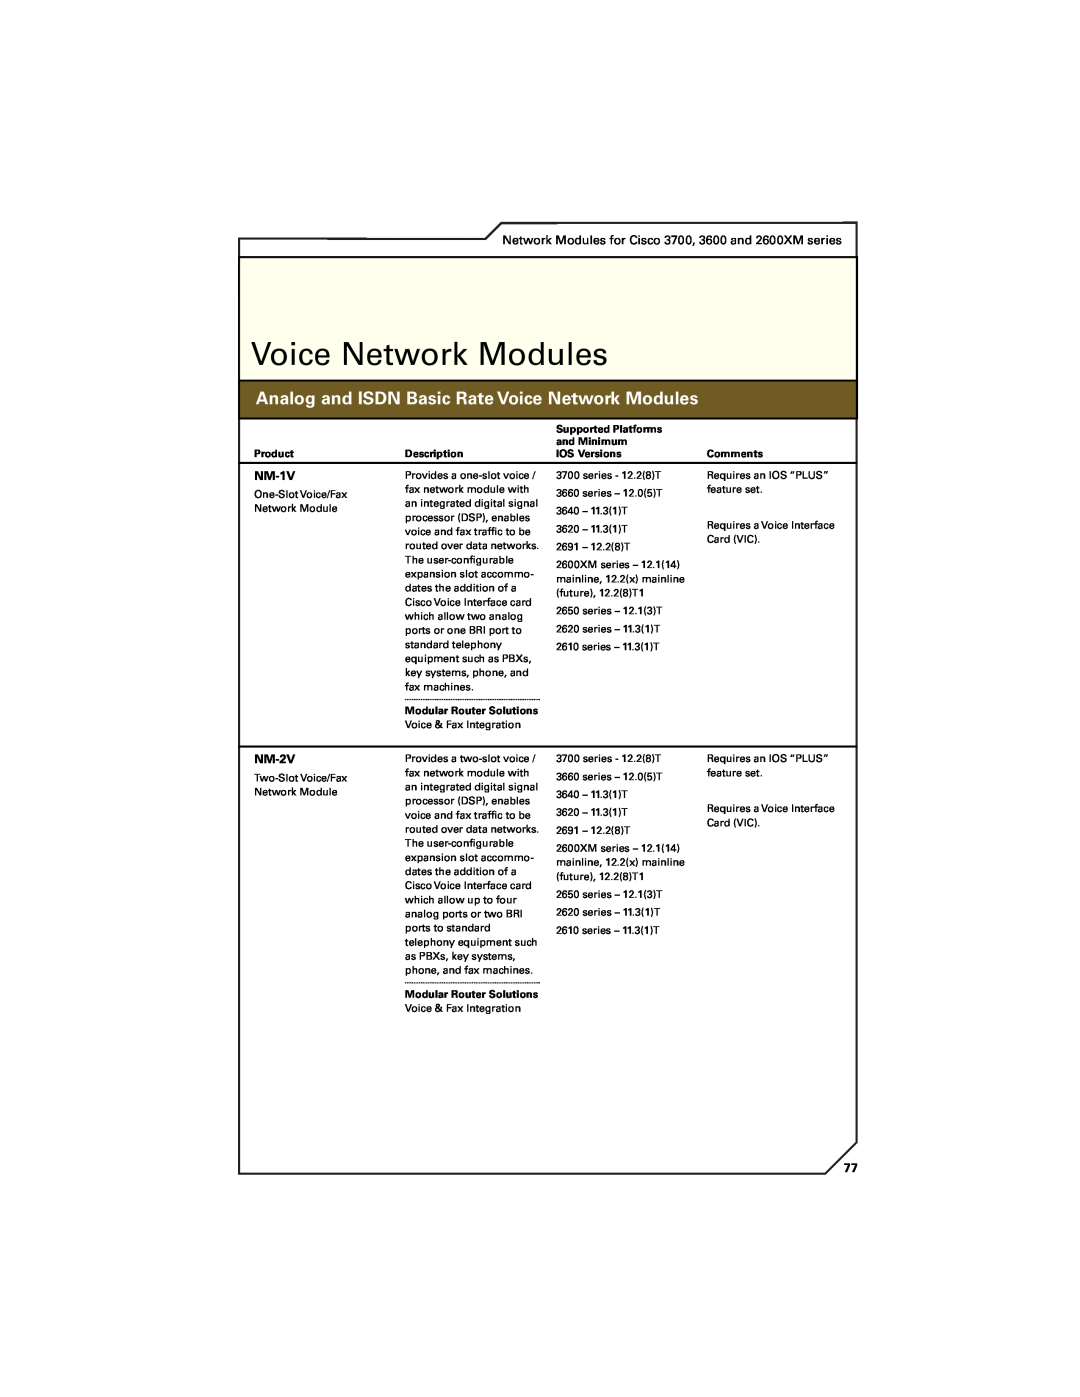 Cisco Systems 7200, 7300, 7400 manual Series Features Overview, Analog and ISDN Basic Rate Voice Network Modules 